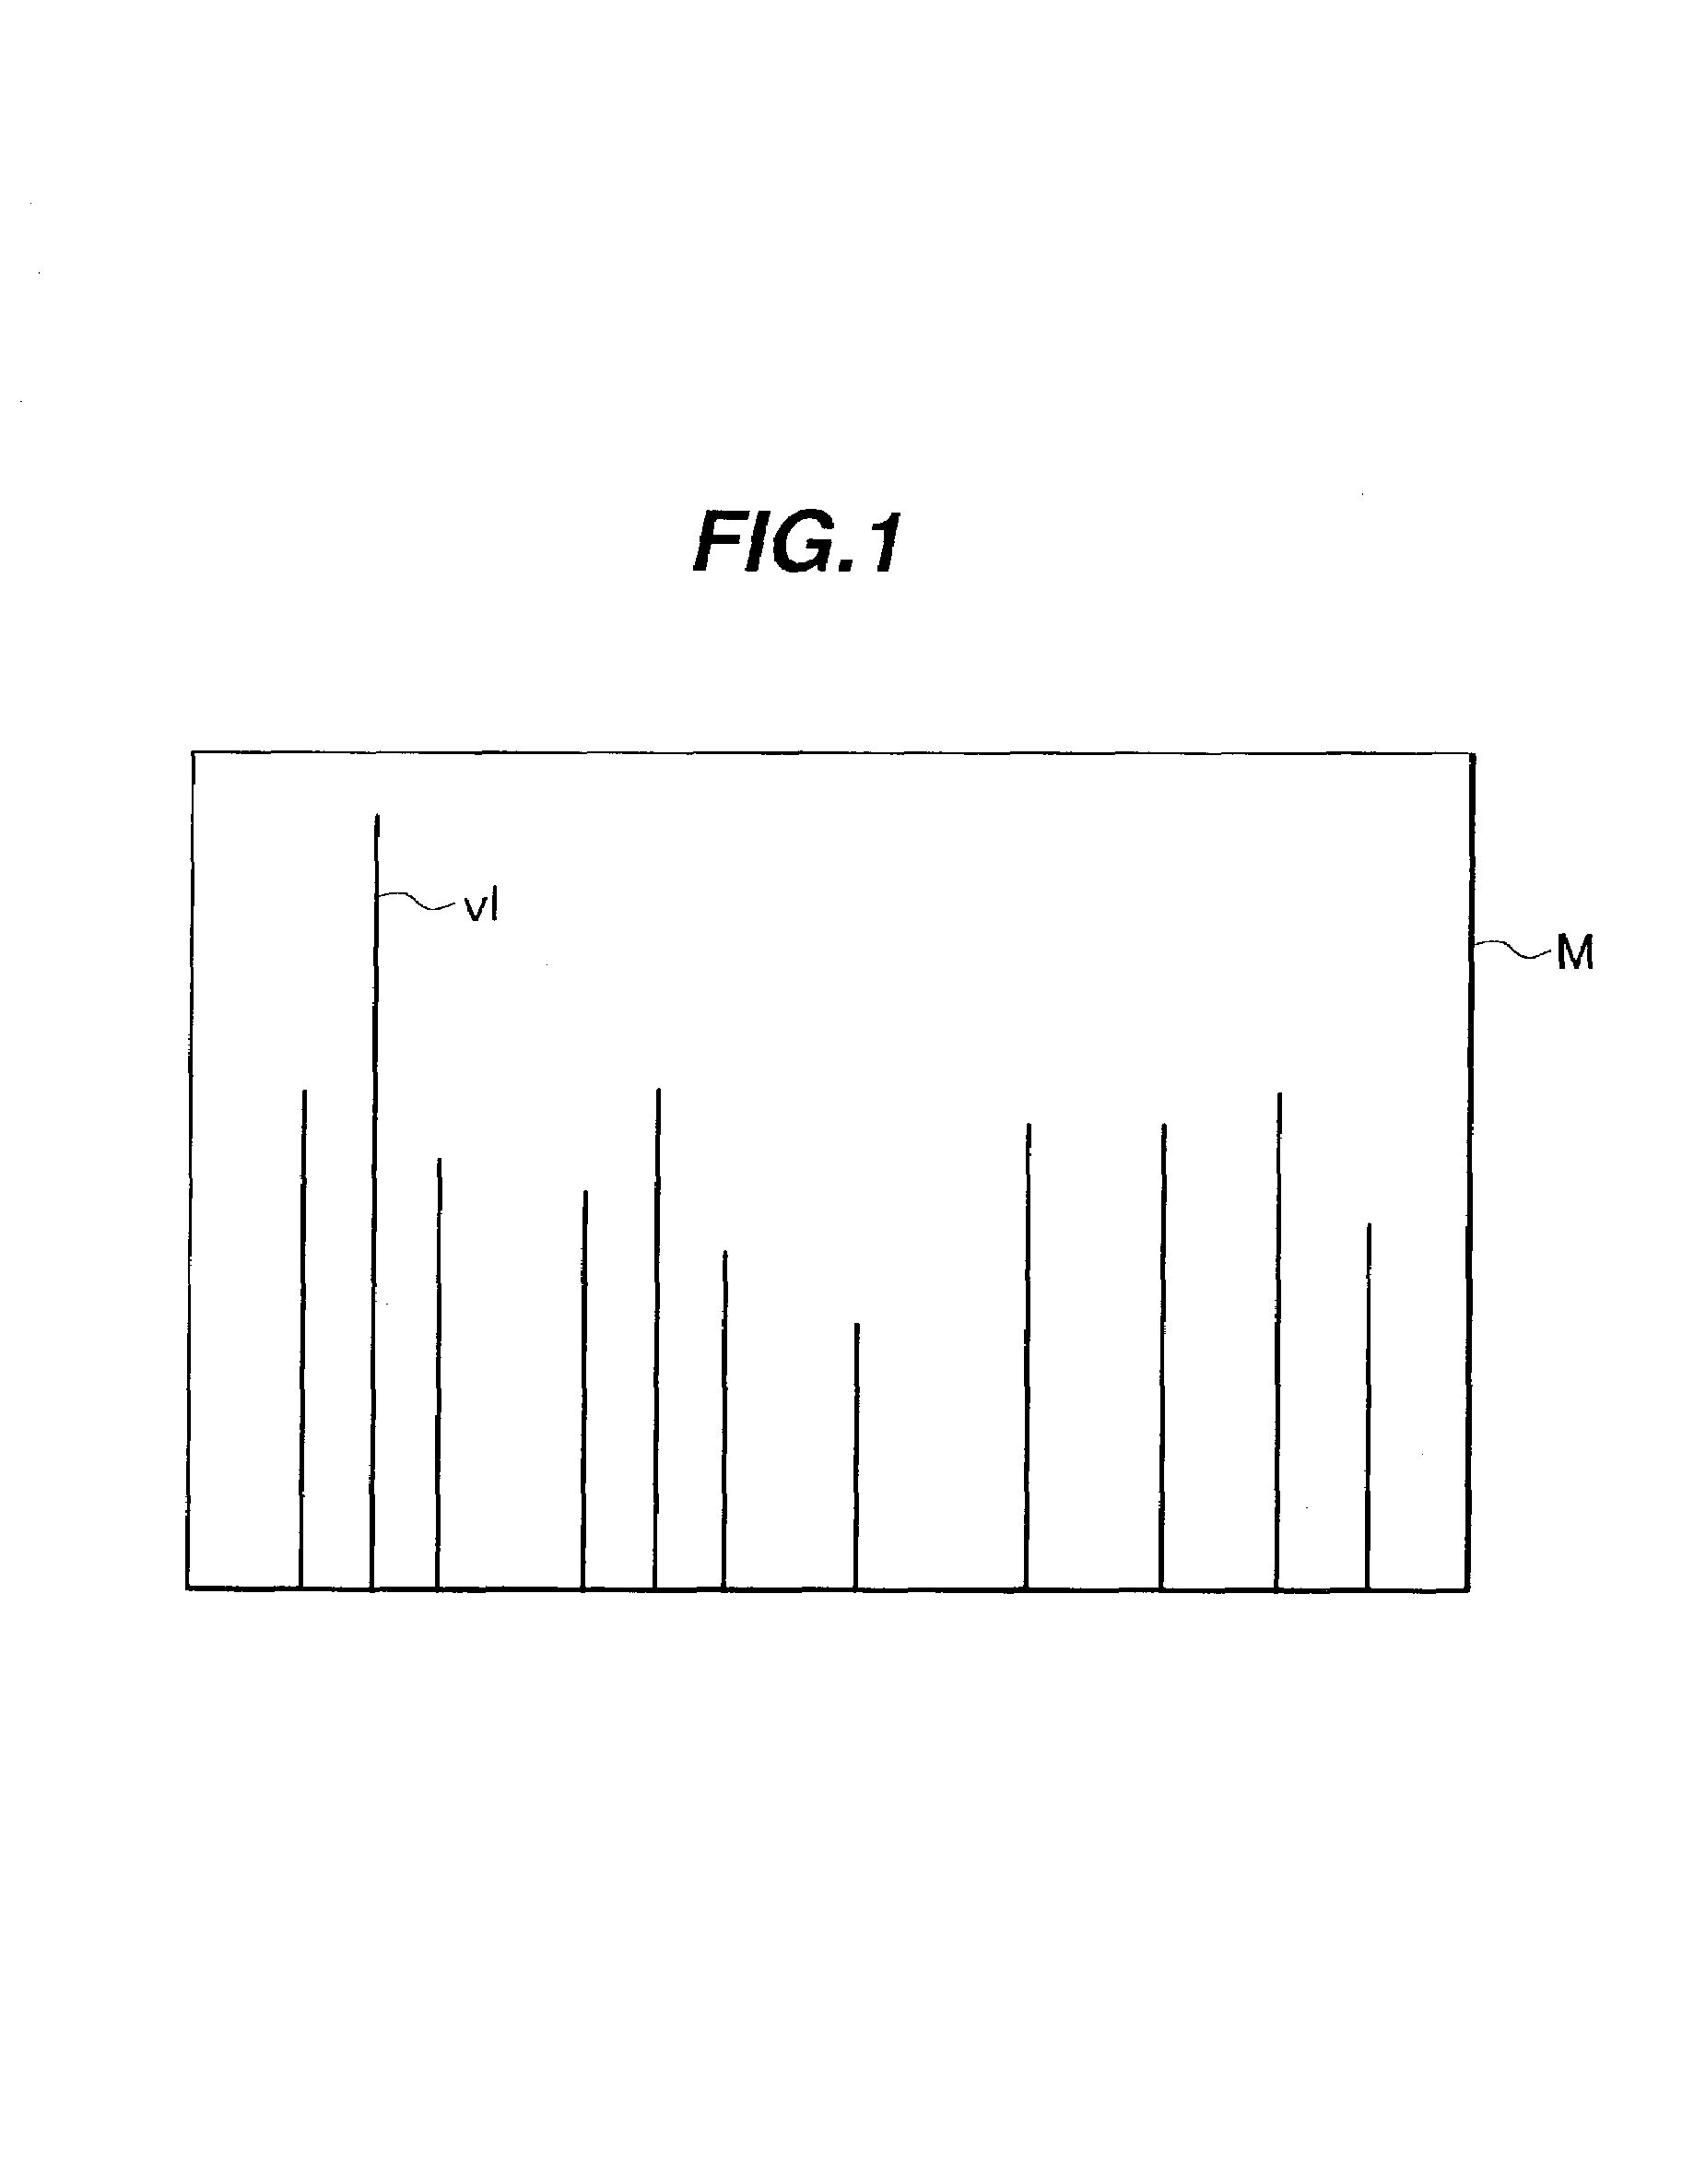 Solid state image sensing apparatus with output level controller